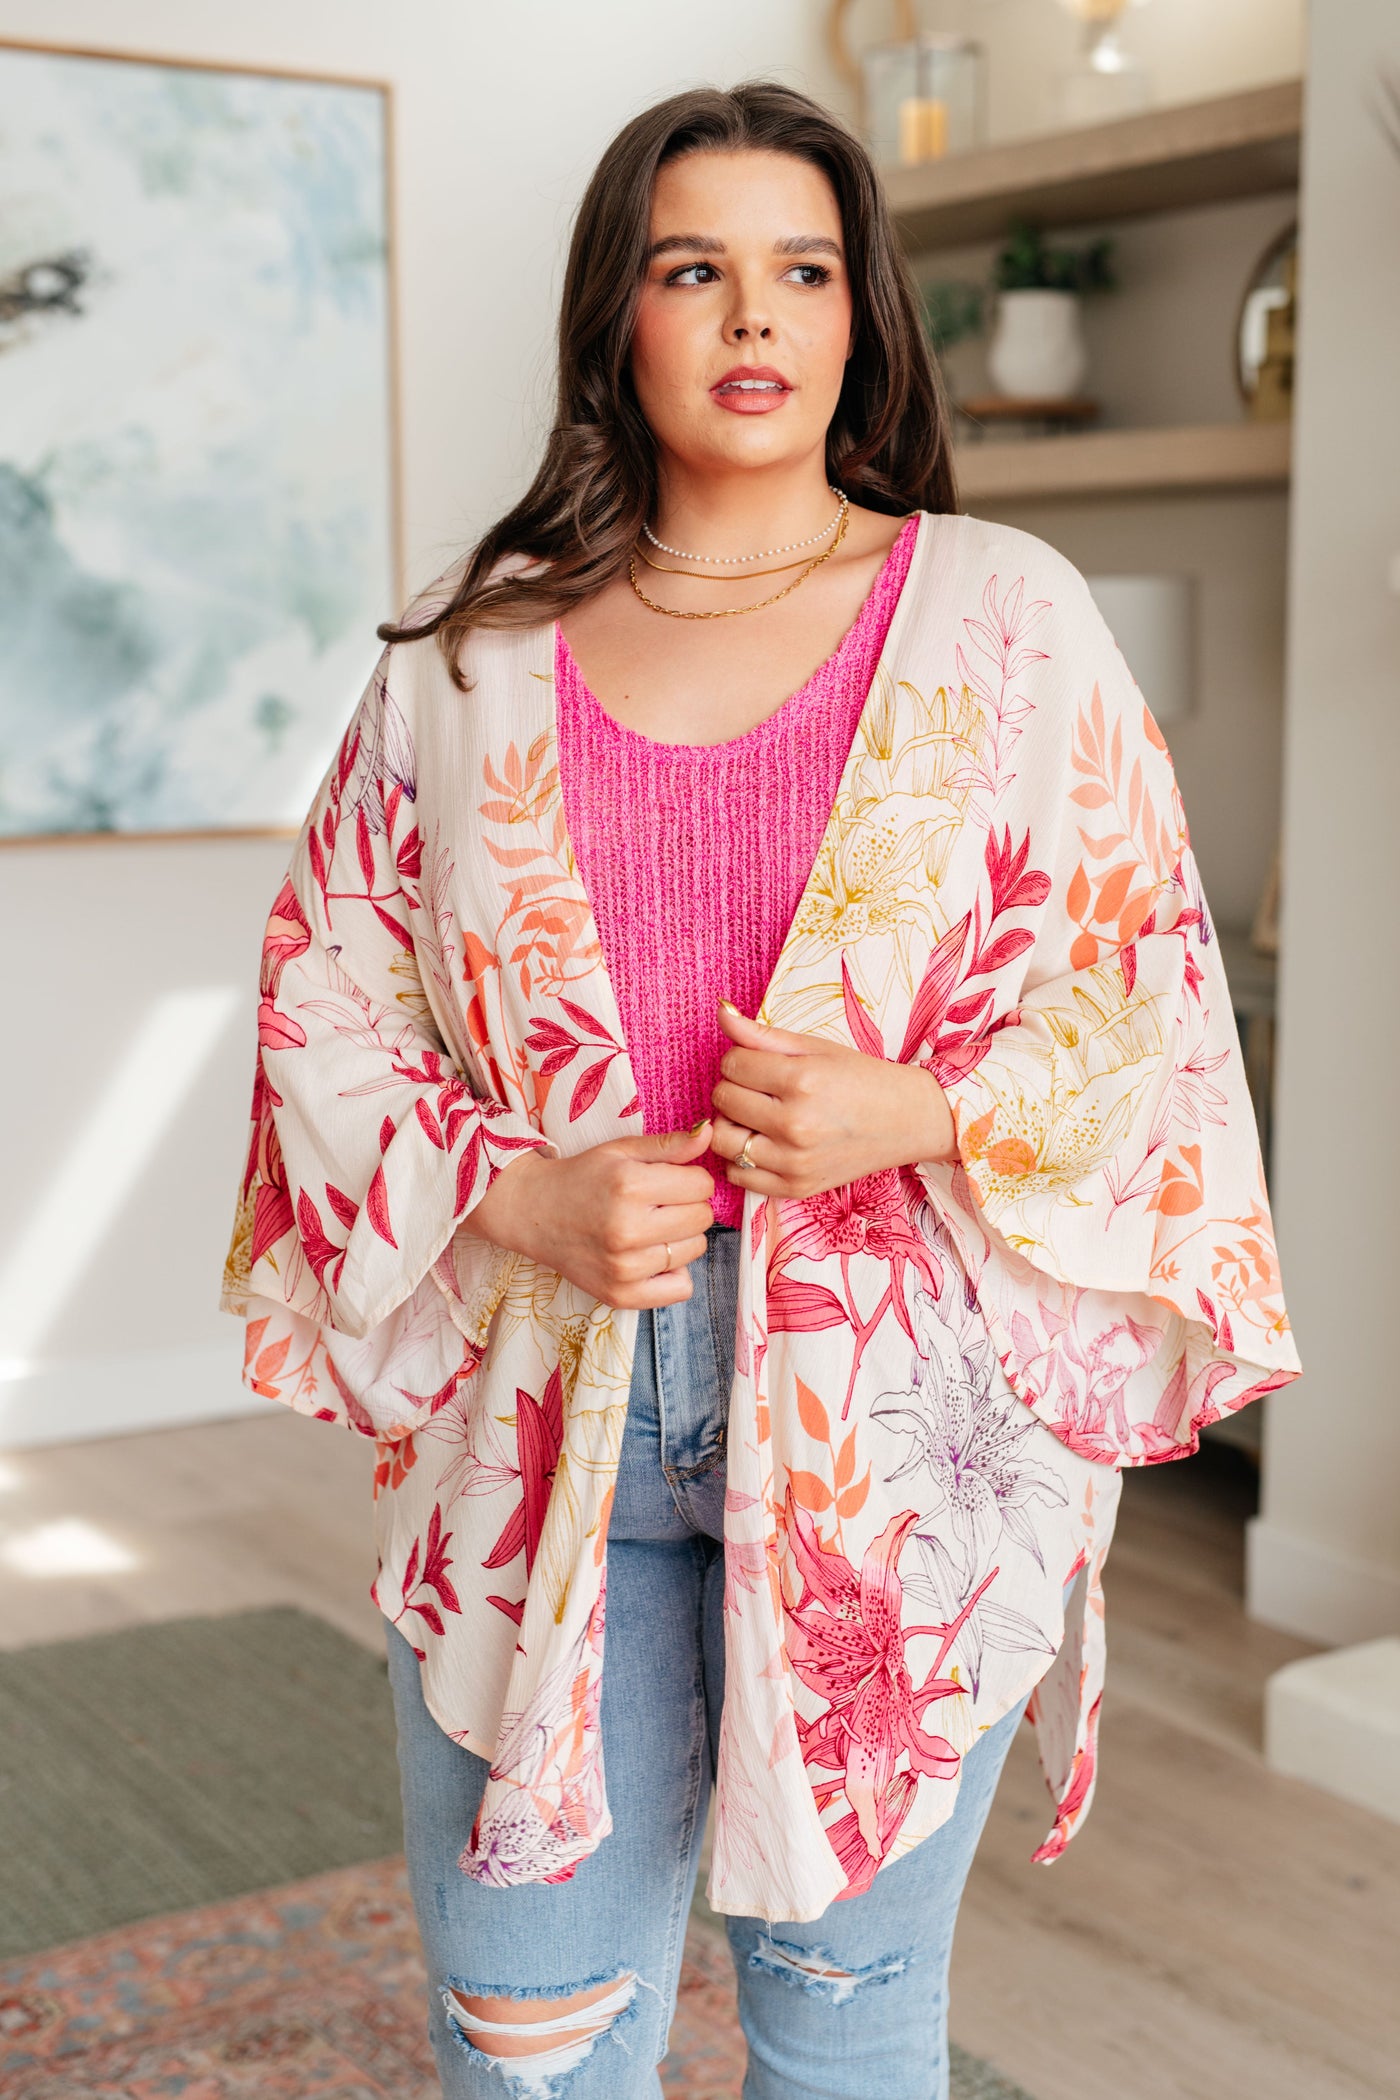 Vacay Season Bell Sleeve Kimono-Layers-Ave Shops-Market Street Nest, Fashionable Clothing, Shoes and Home Décor Located in Mabank, TX